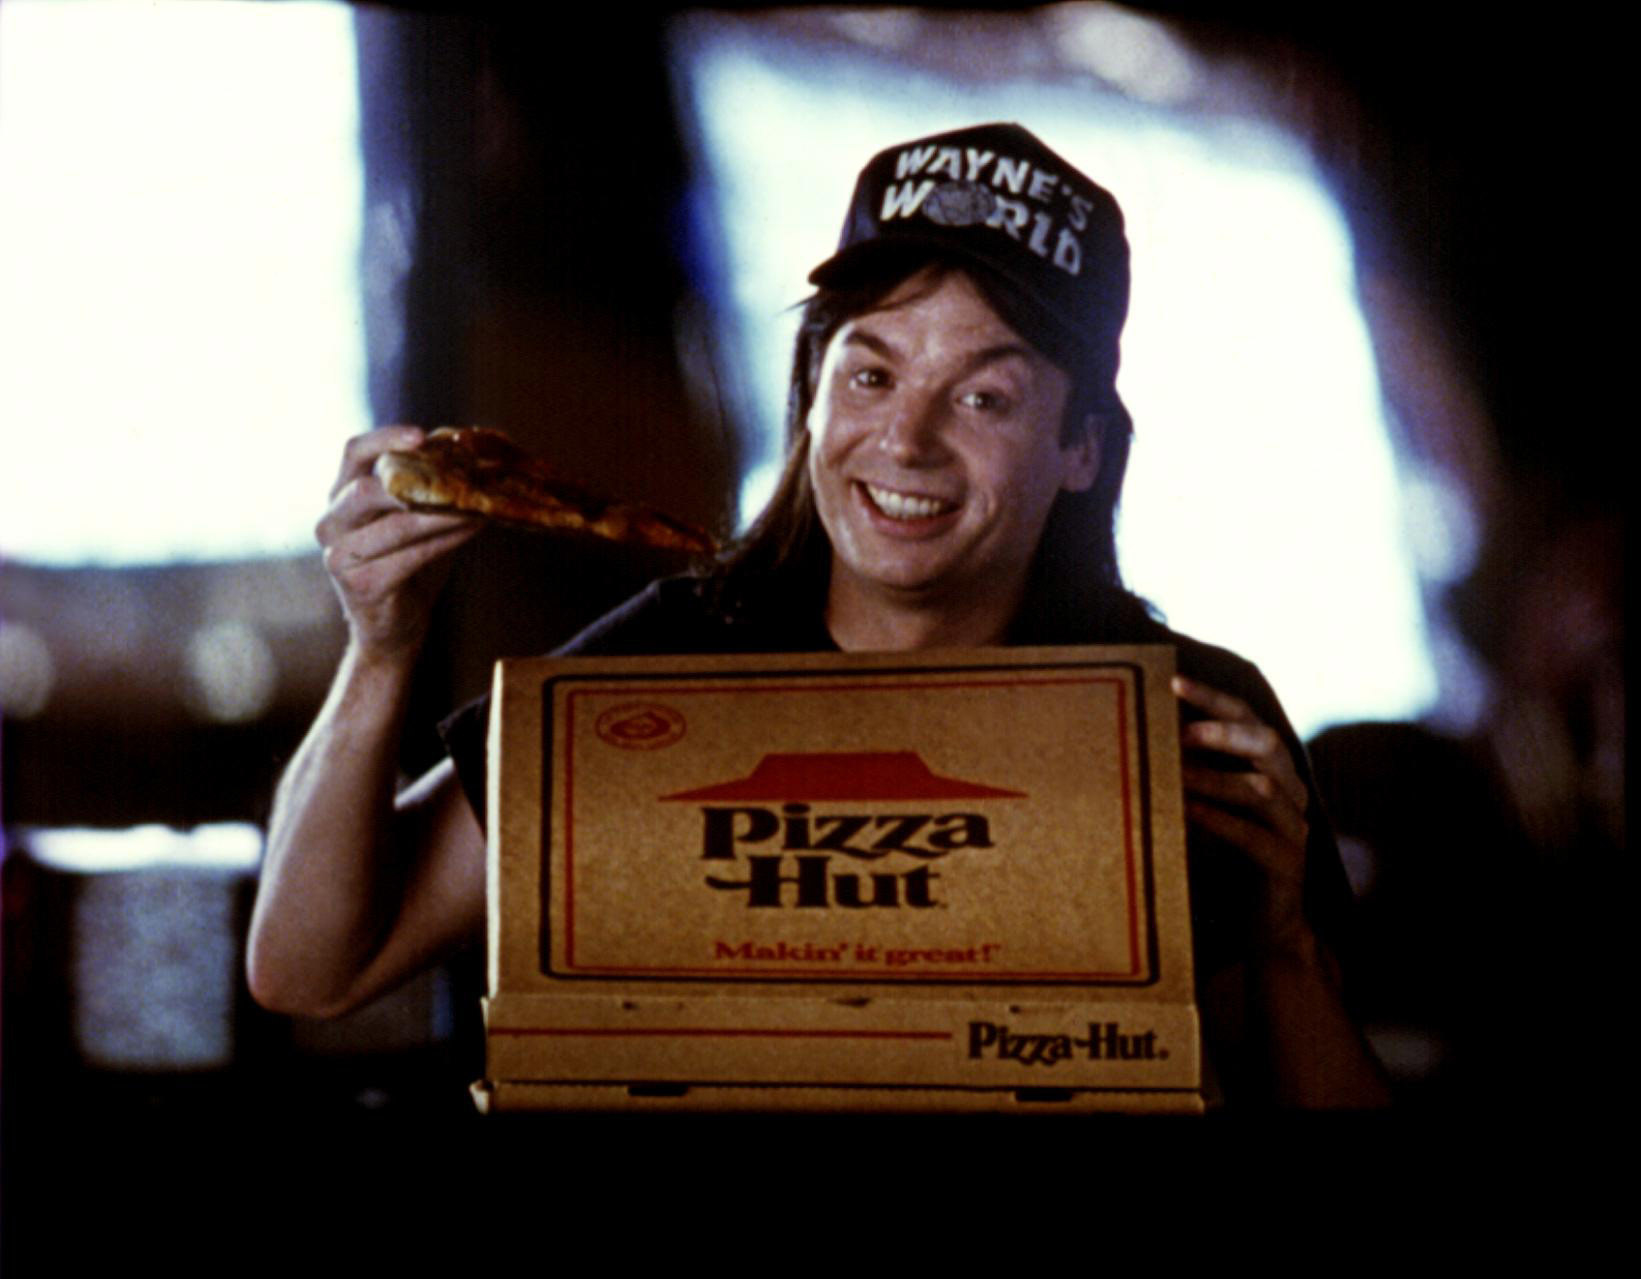 Wayne eating a slice of pizza from a Pizza Hut box and smiling